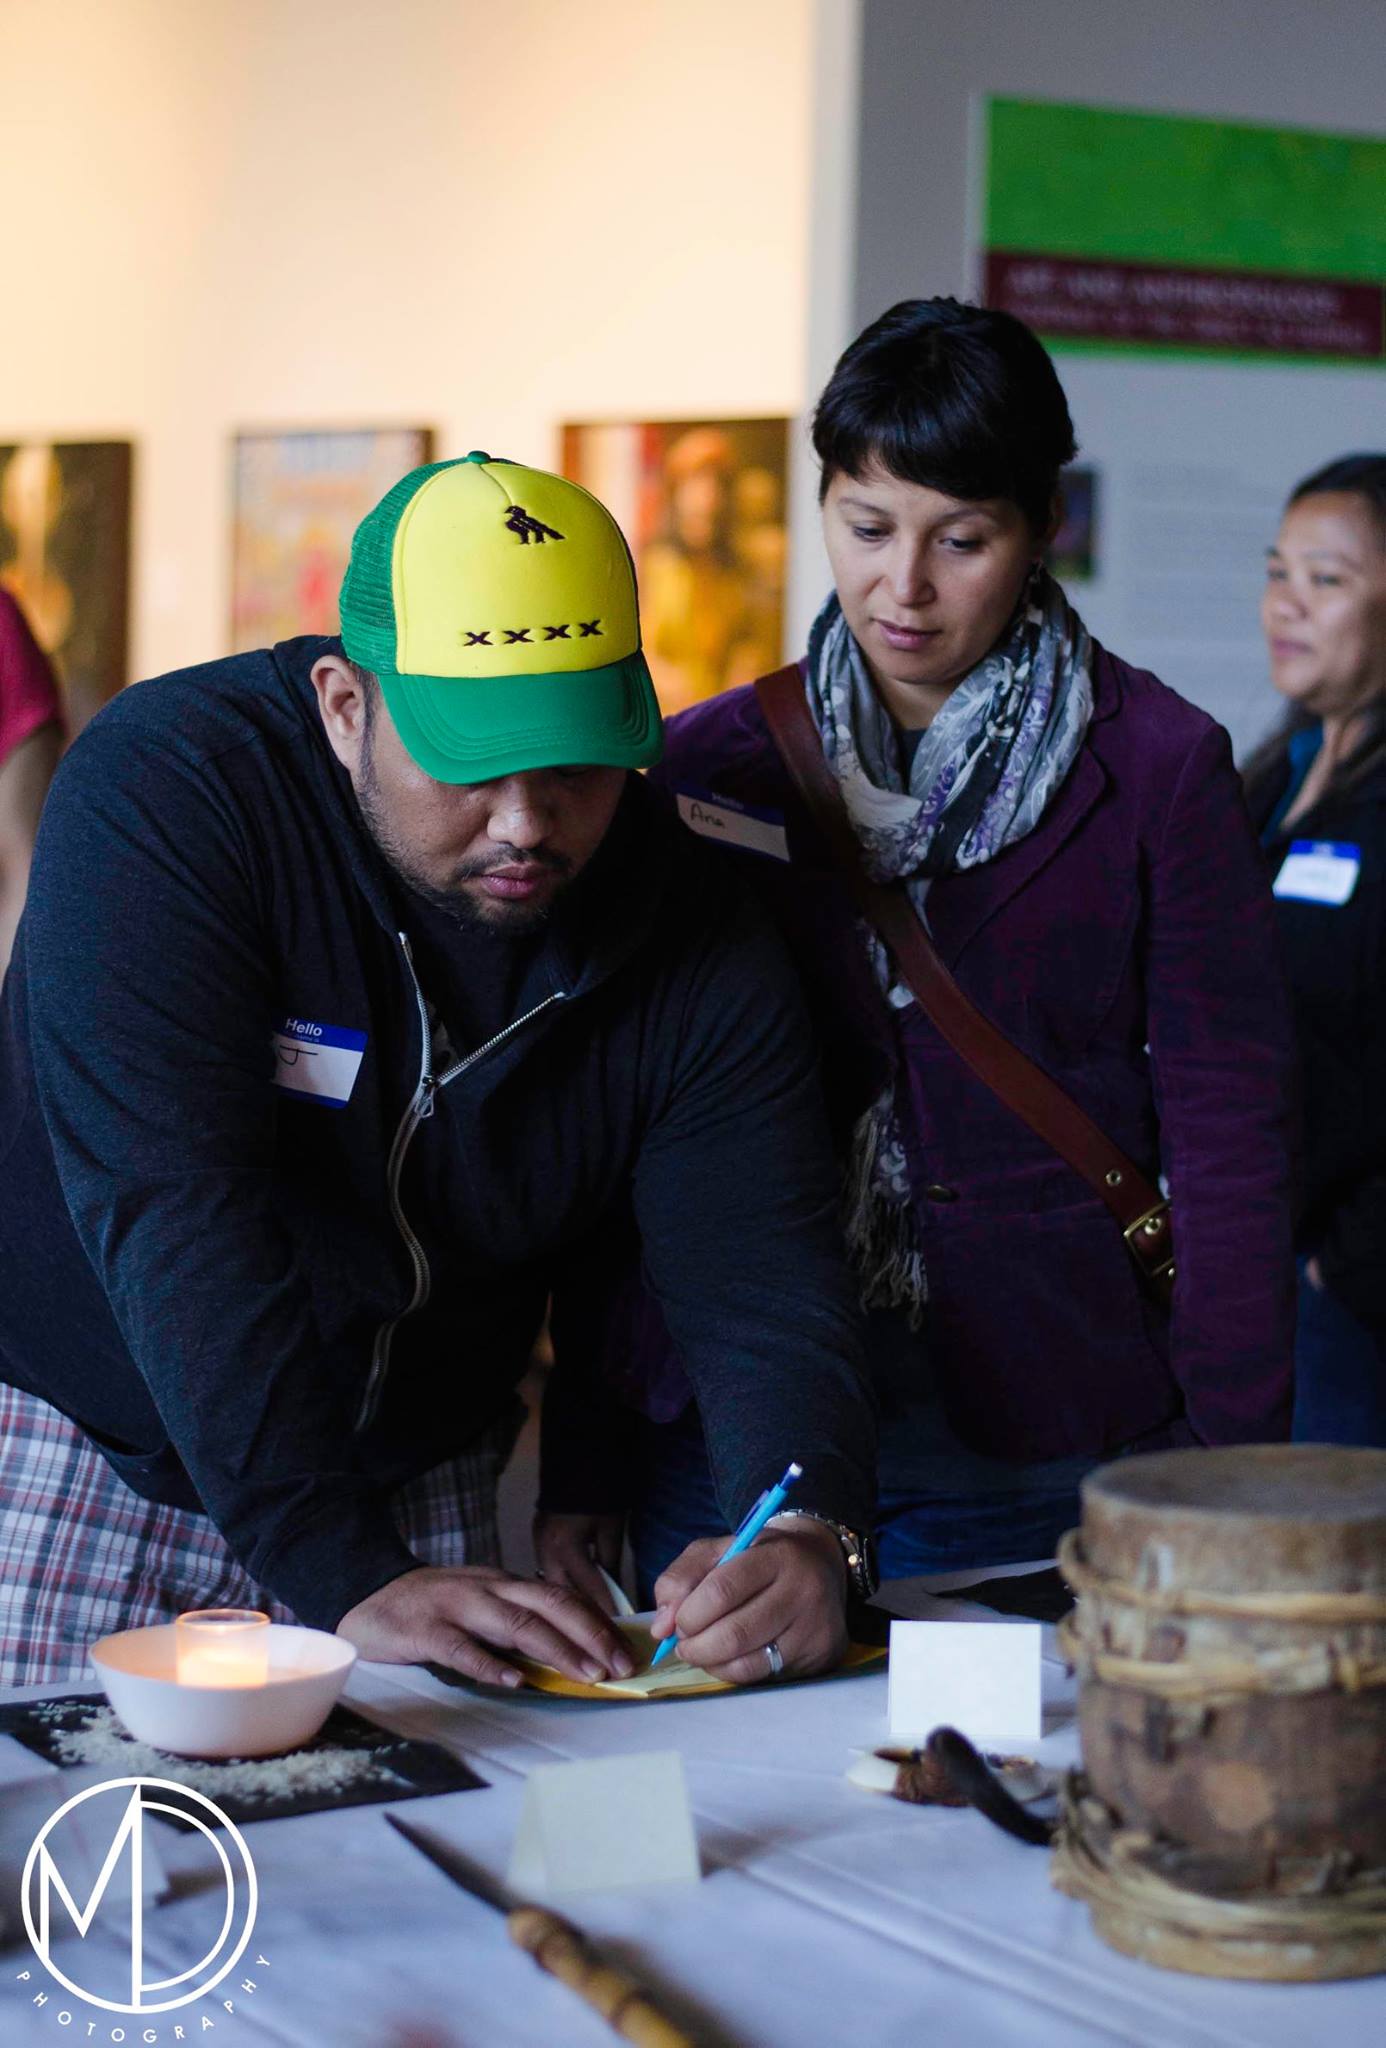 Guests writing their interpretations of artifacts displayed on the tables. (c) Field Museum of Natural History - CC BY-NC 4.0